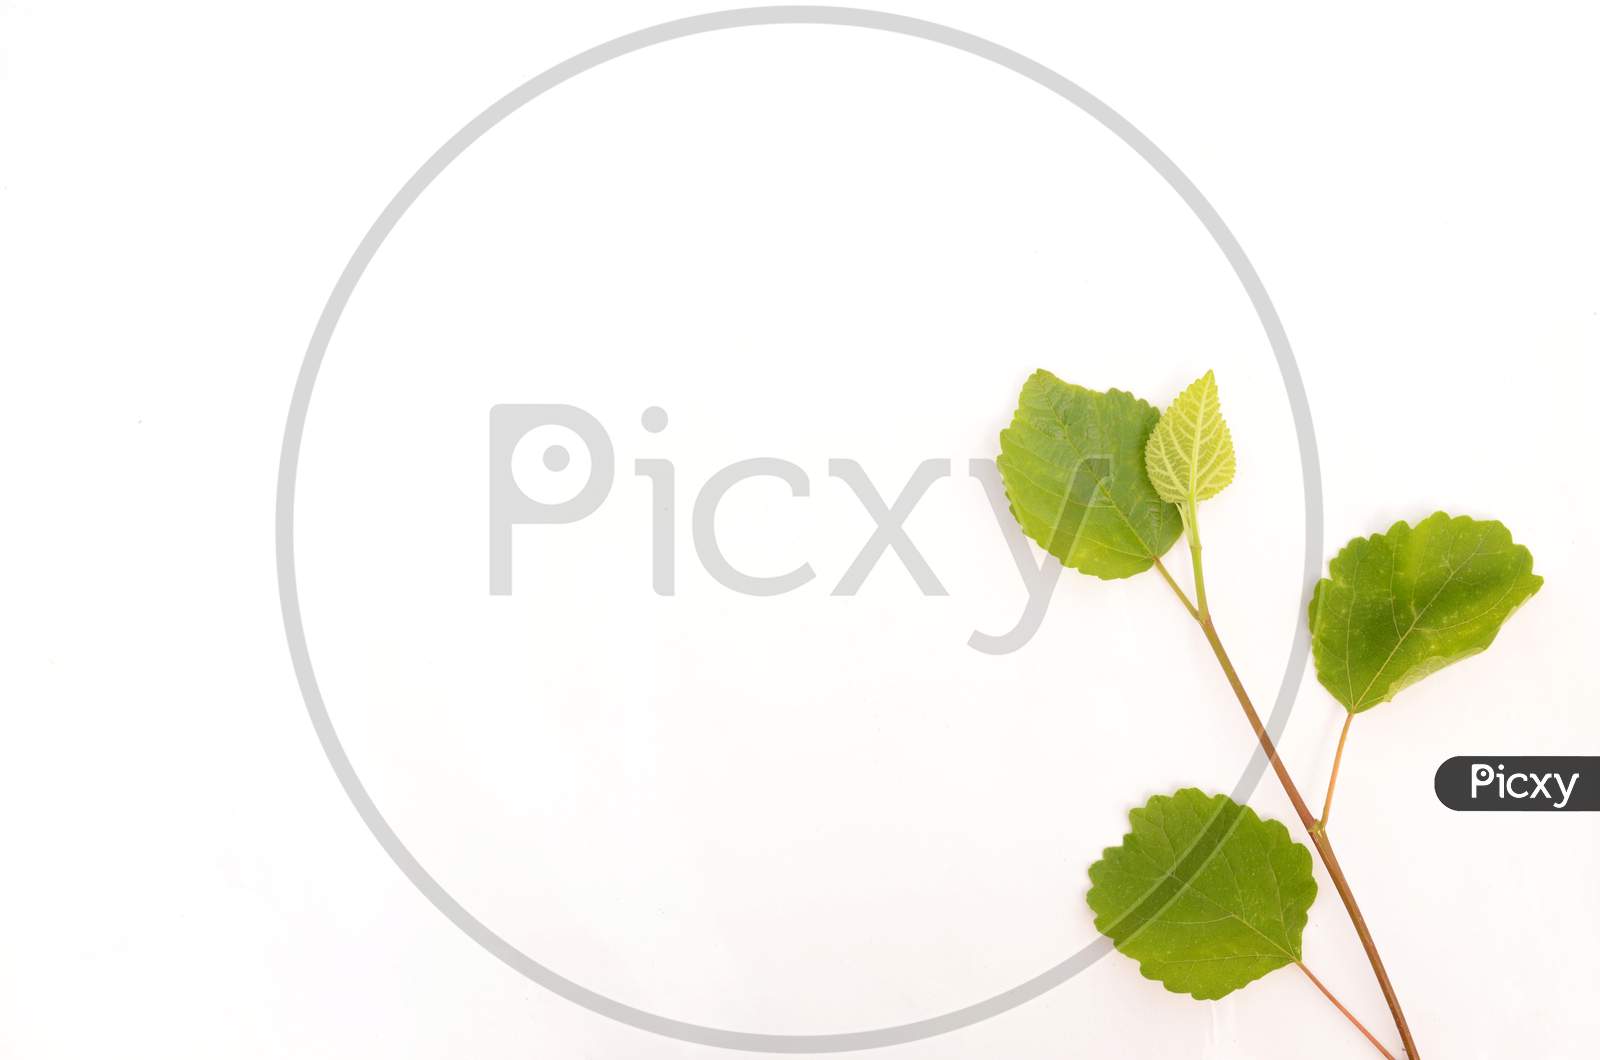 The Green Plant With Leaves Of Blueberry Isolated On White Background.